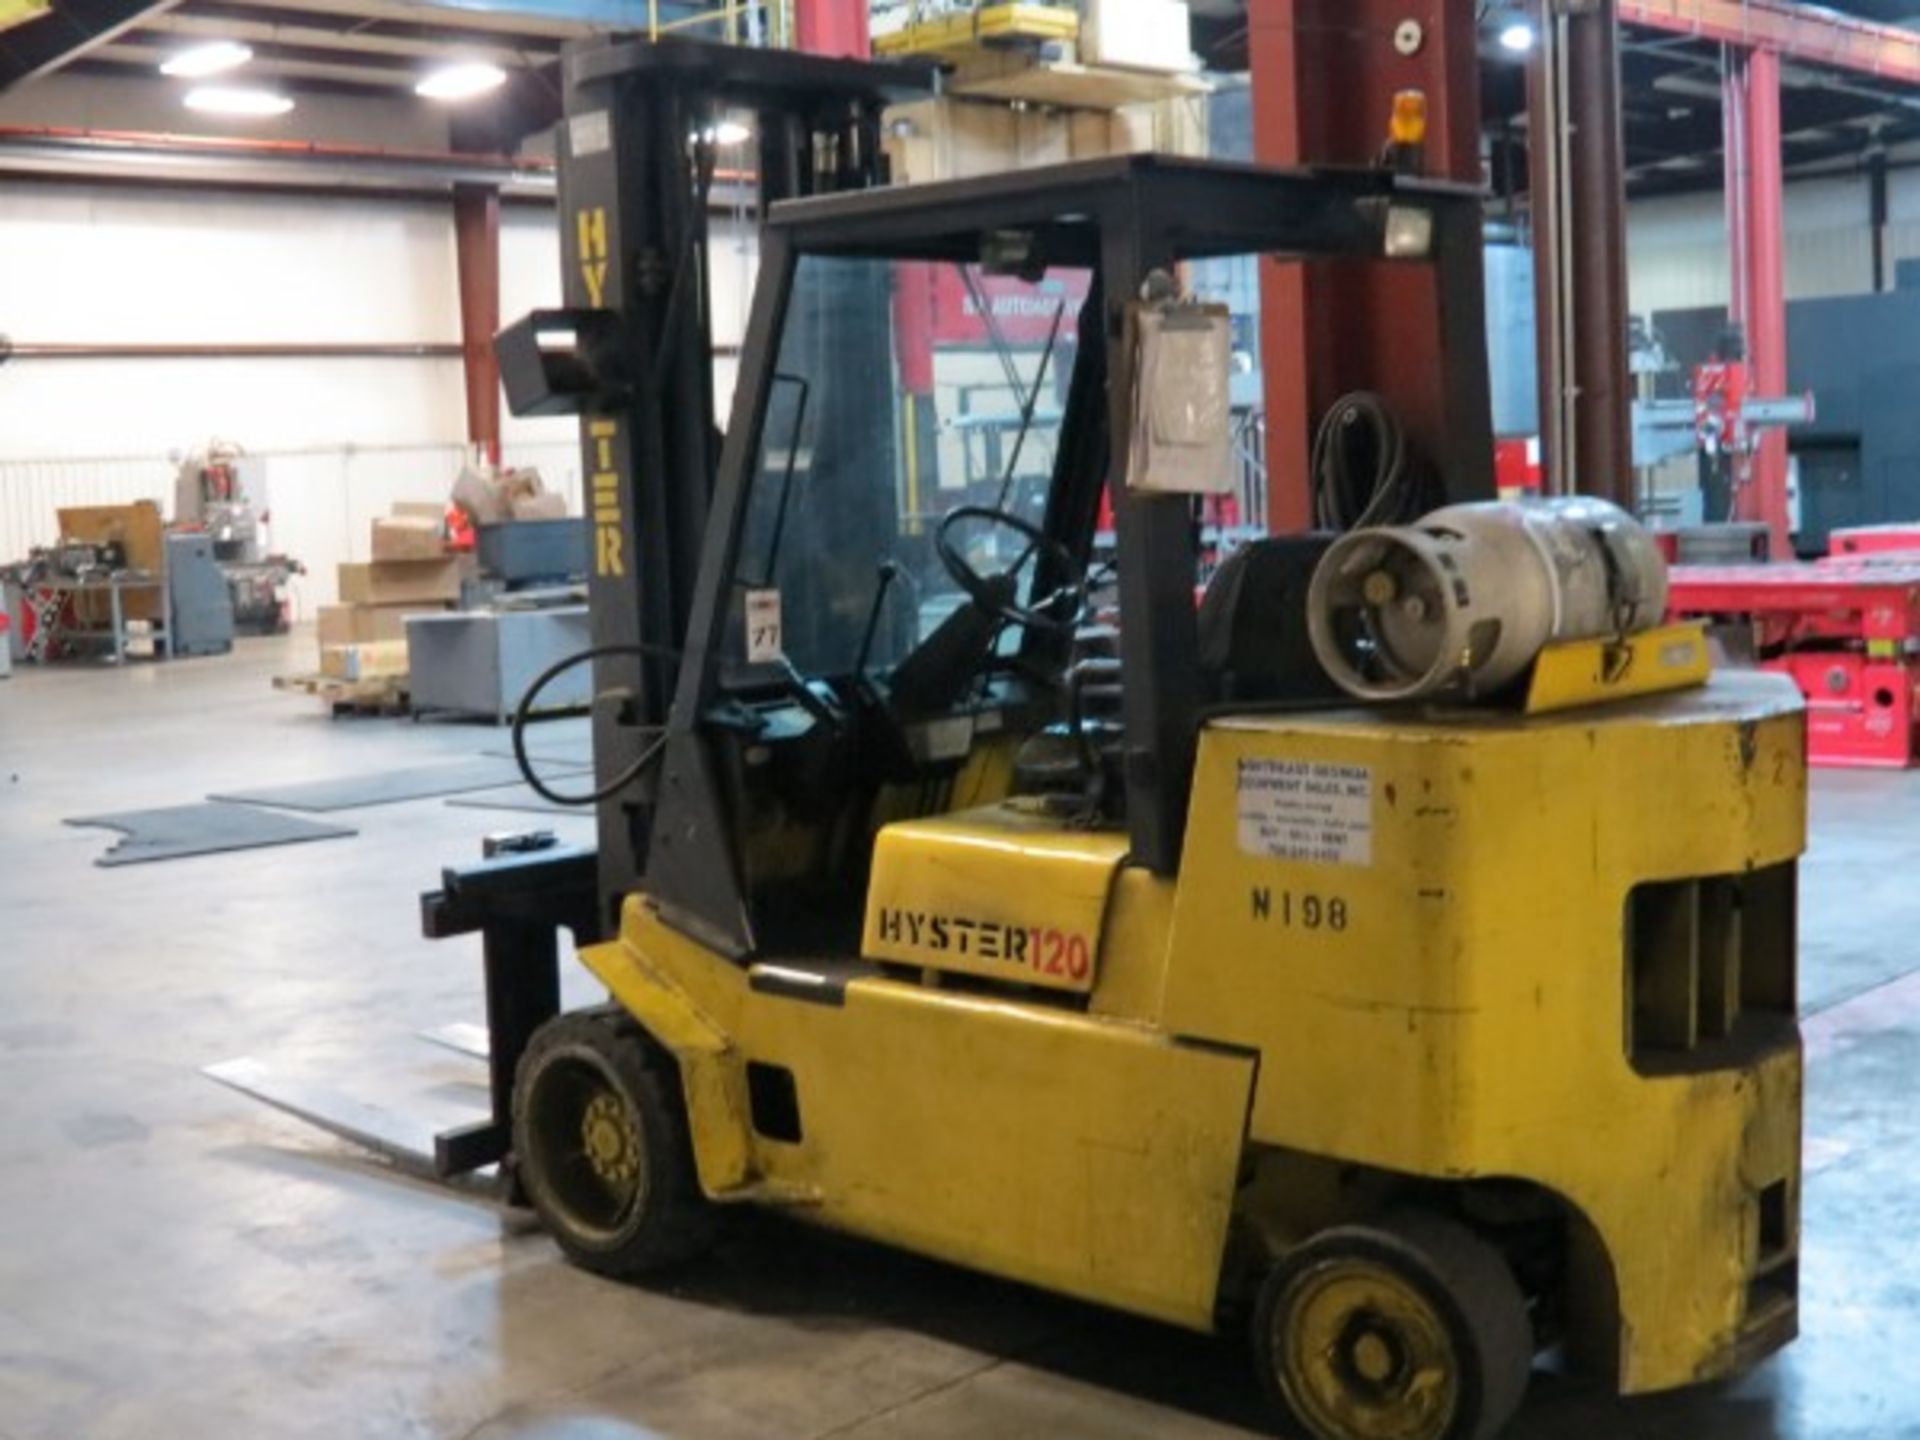 Hyster 120 Forklift 11500 Cap, 49475 hours *Late Delivery 4/26/19* - Image 2 of 2